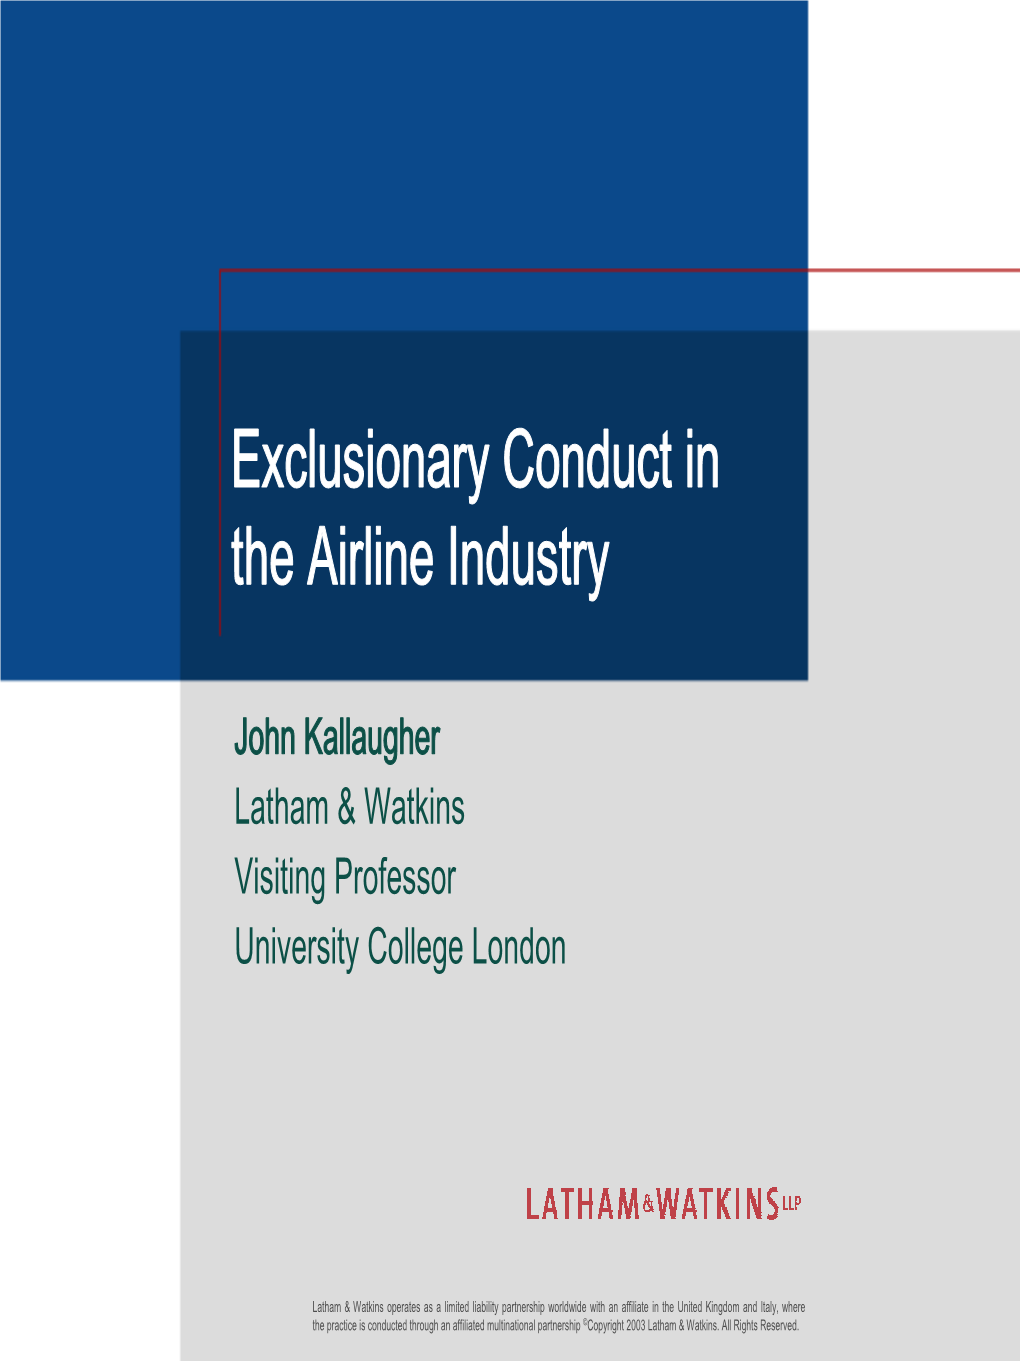 Exclusionary Conduct in the Airline Industry